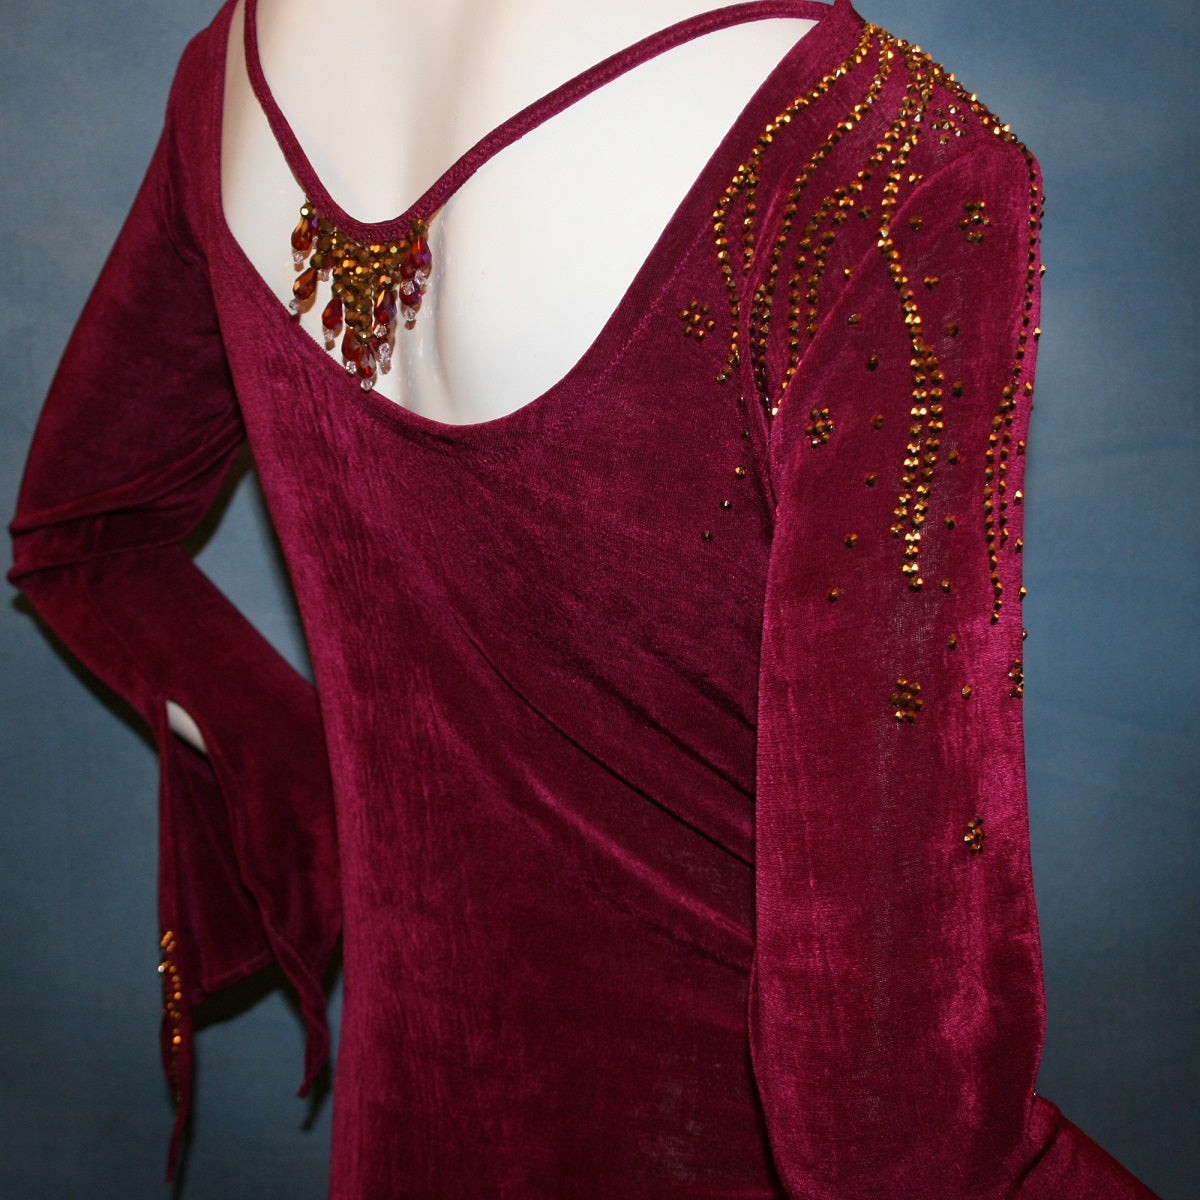 Crystal's Creations back close up view of Magenta Latin/rhythm/tango dress created out of deep magenta/wine slinky features ruching, long flared sleeves & is embellished with gold aurum Swarovski rhinestone work